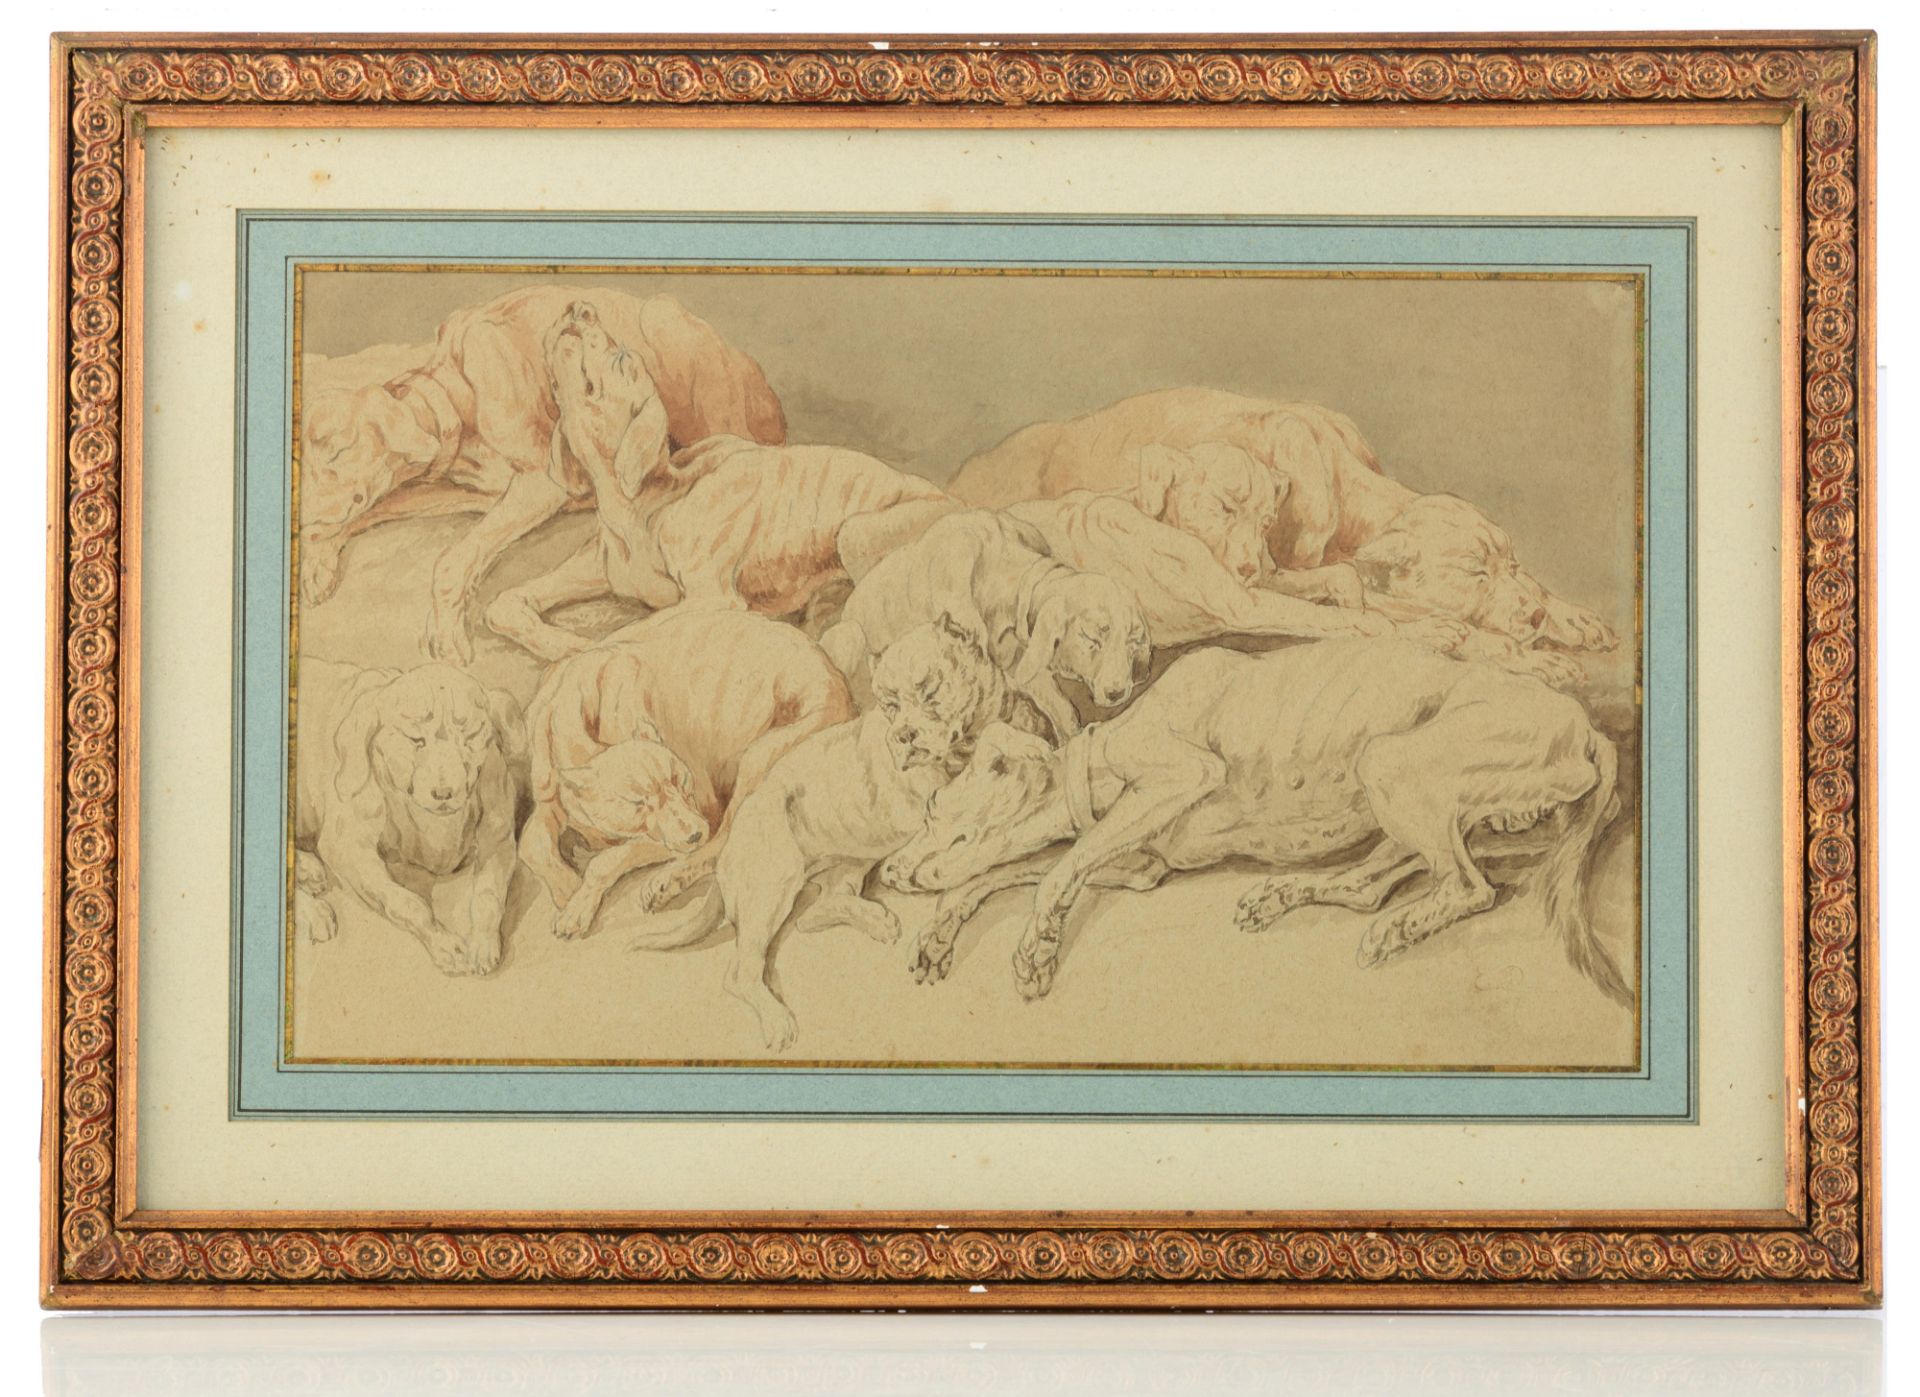 Monogrammed E.D., a pack of dogs, three washed drawings, 21 x 31 - 35 cm - Image 5 of 12